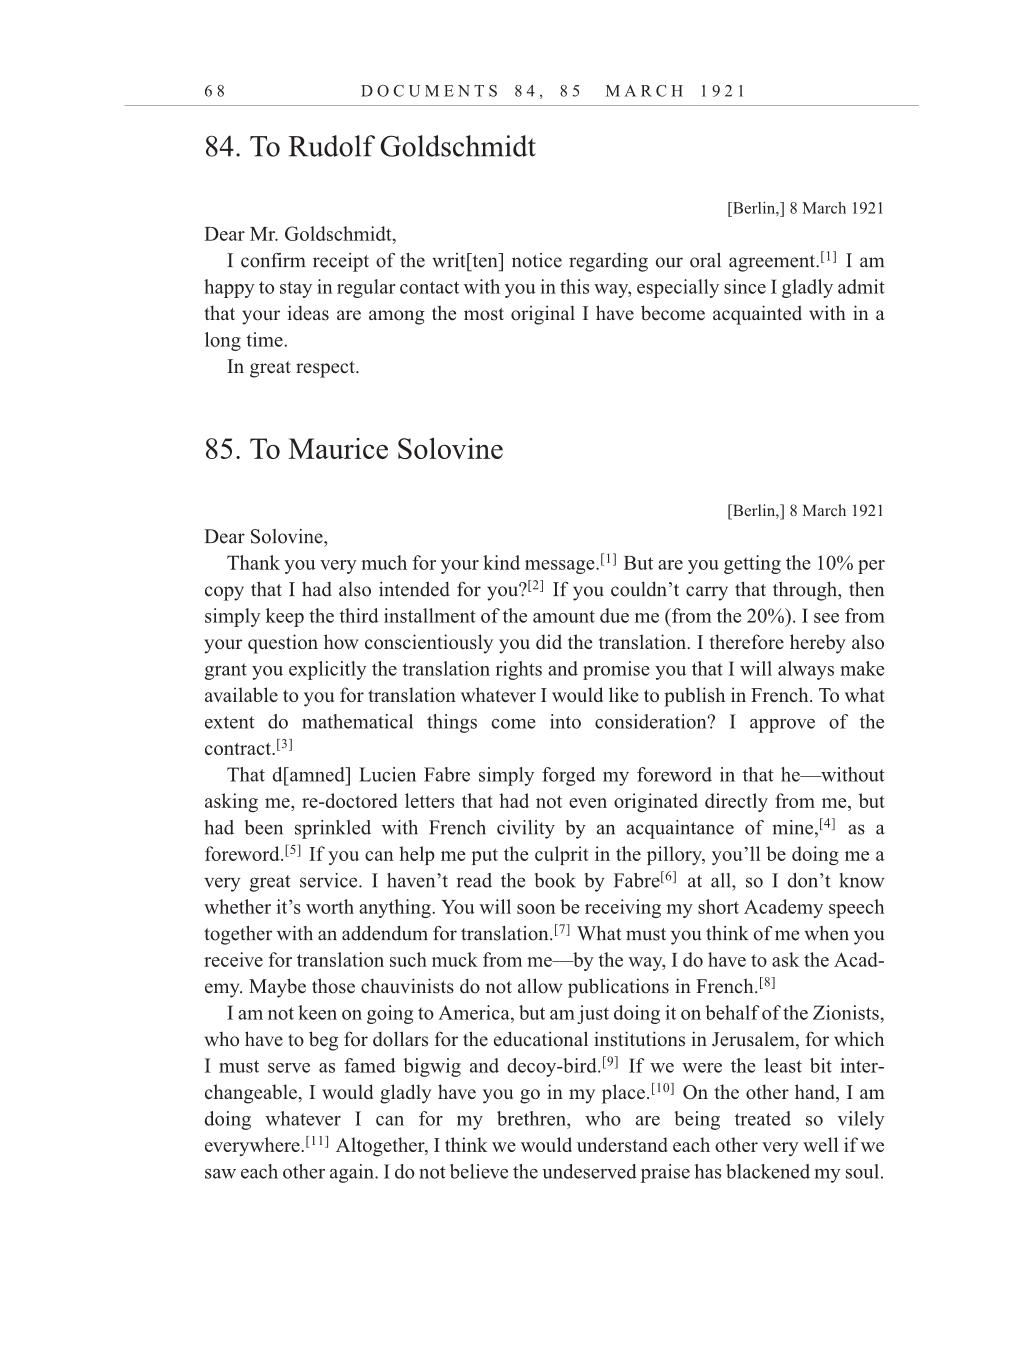 Volume 12: The Berlin Years: Correspondence, January-December 1921 (English translation supplement) page 68